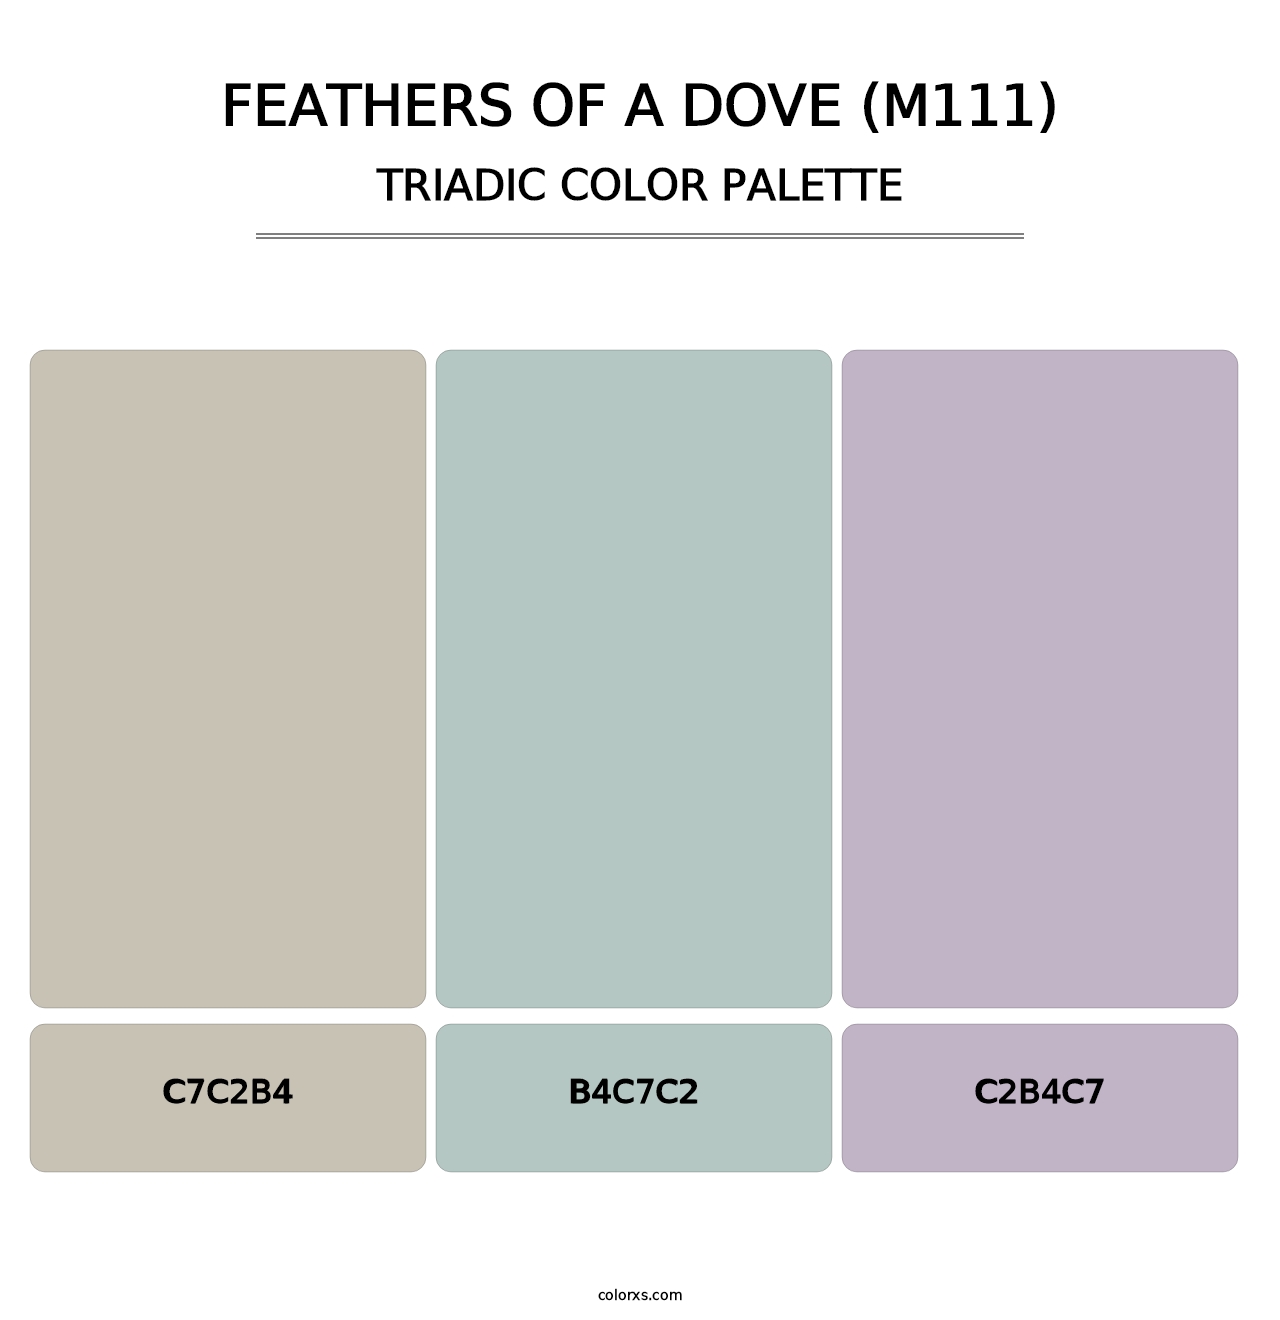 Feathers of a Dove (M111) - Triadic Color Palette